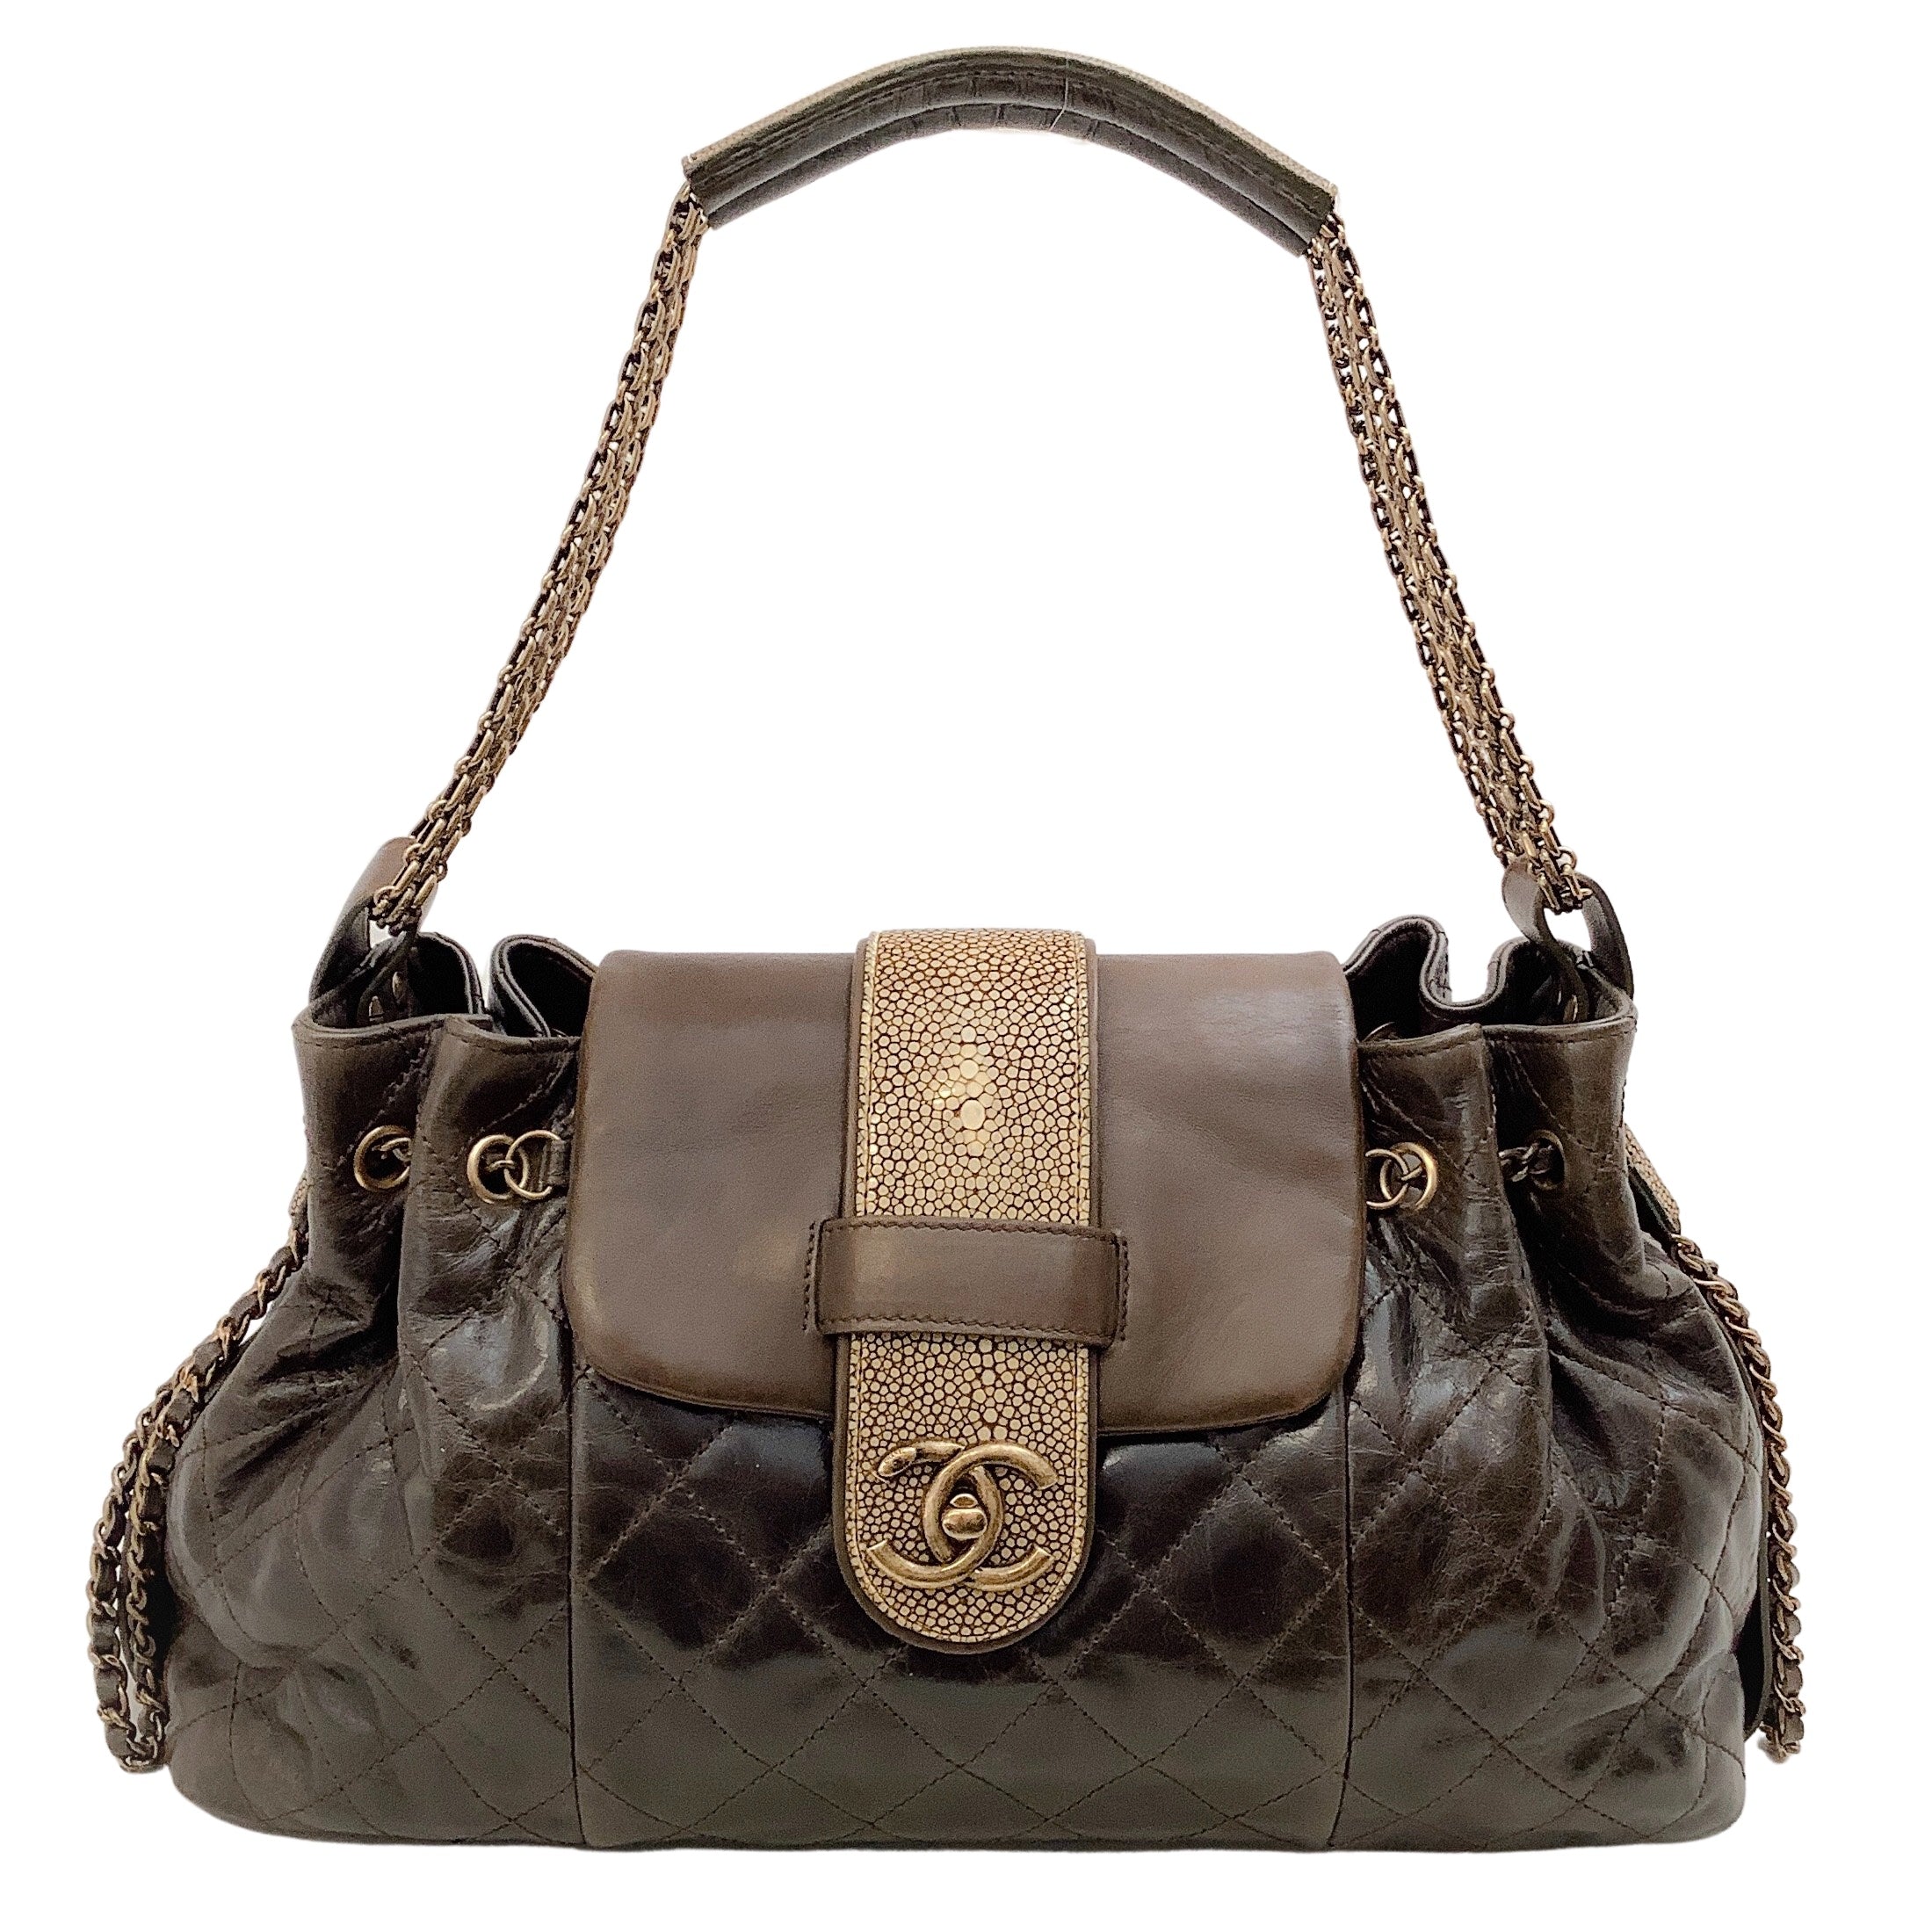 Chanel Brown Leather Quilted Bindi Shoulder Bag with Stingray Flap